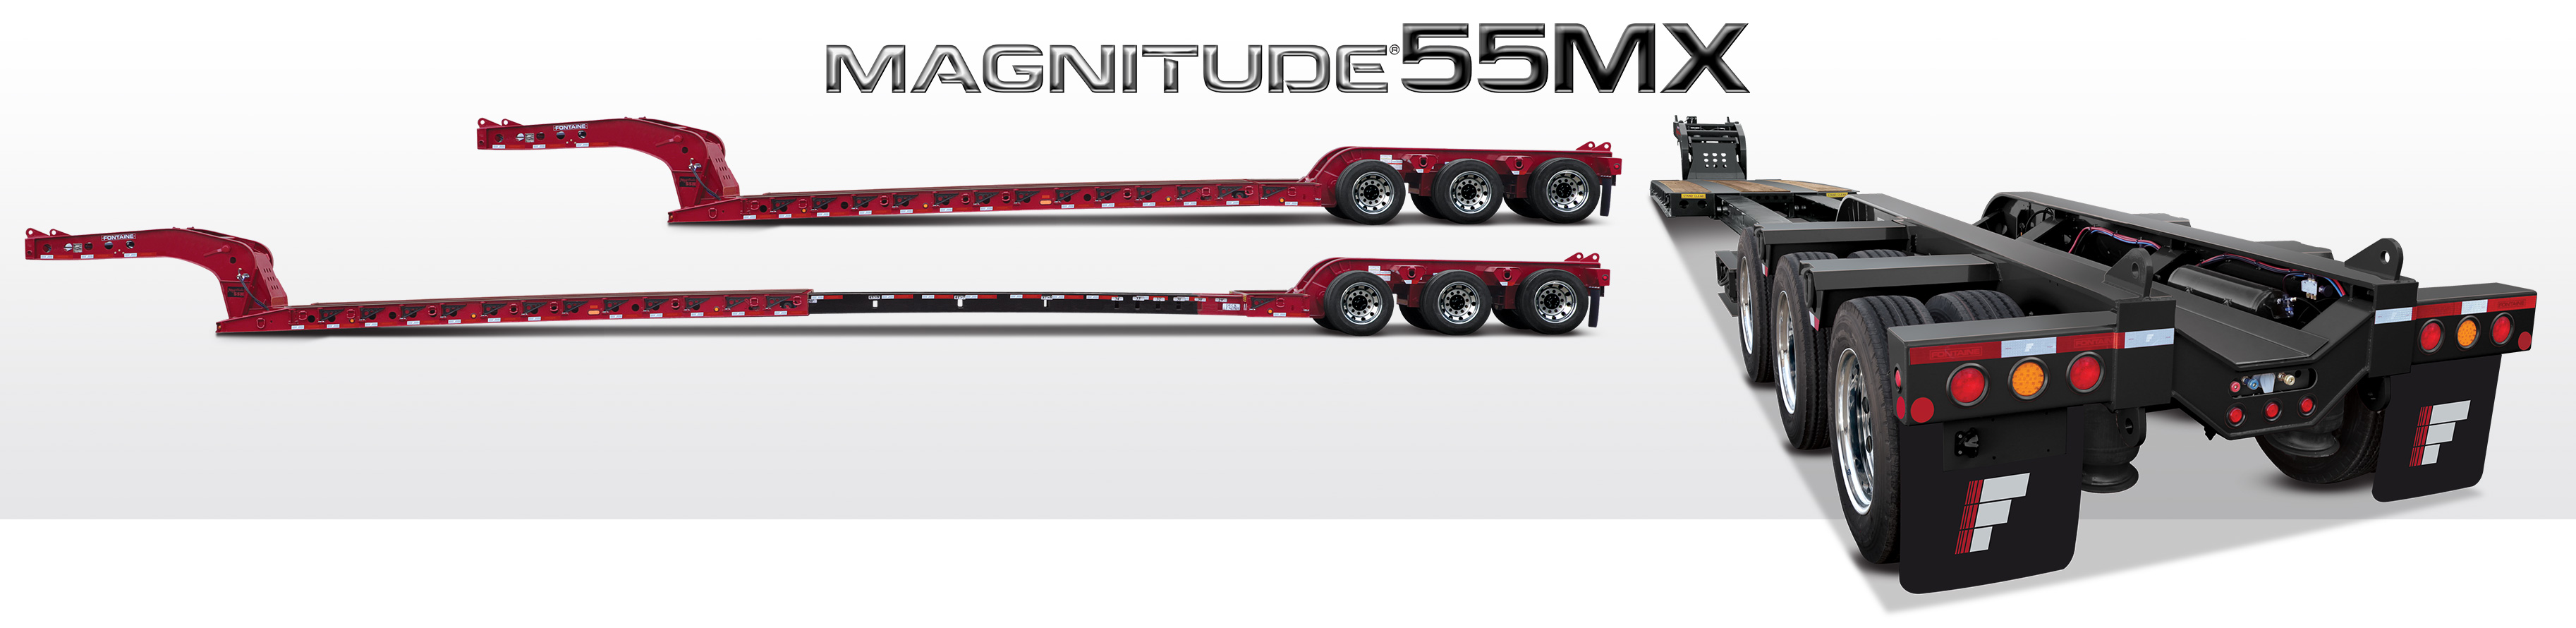 Magnitude 55MX Extendable lowbed trailers